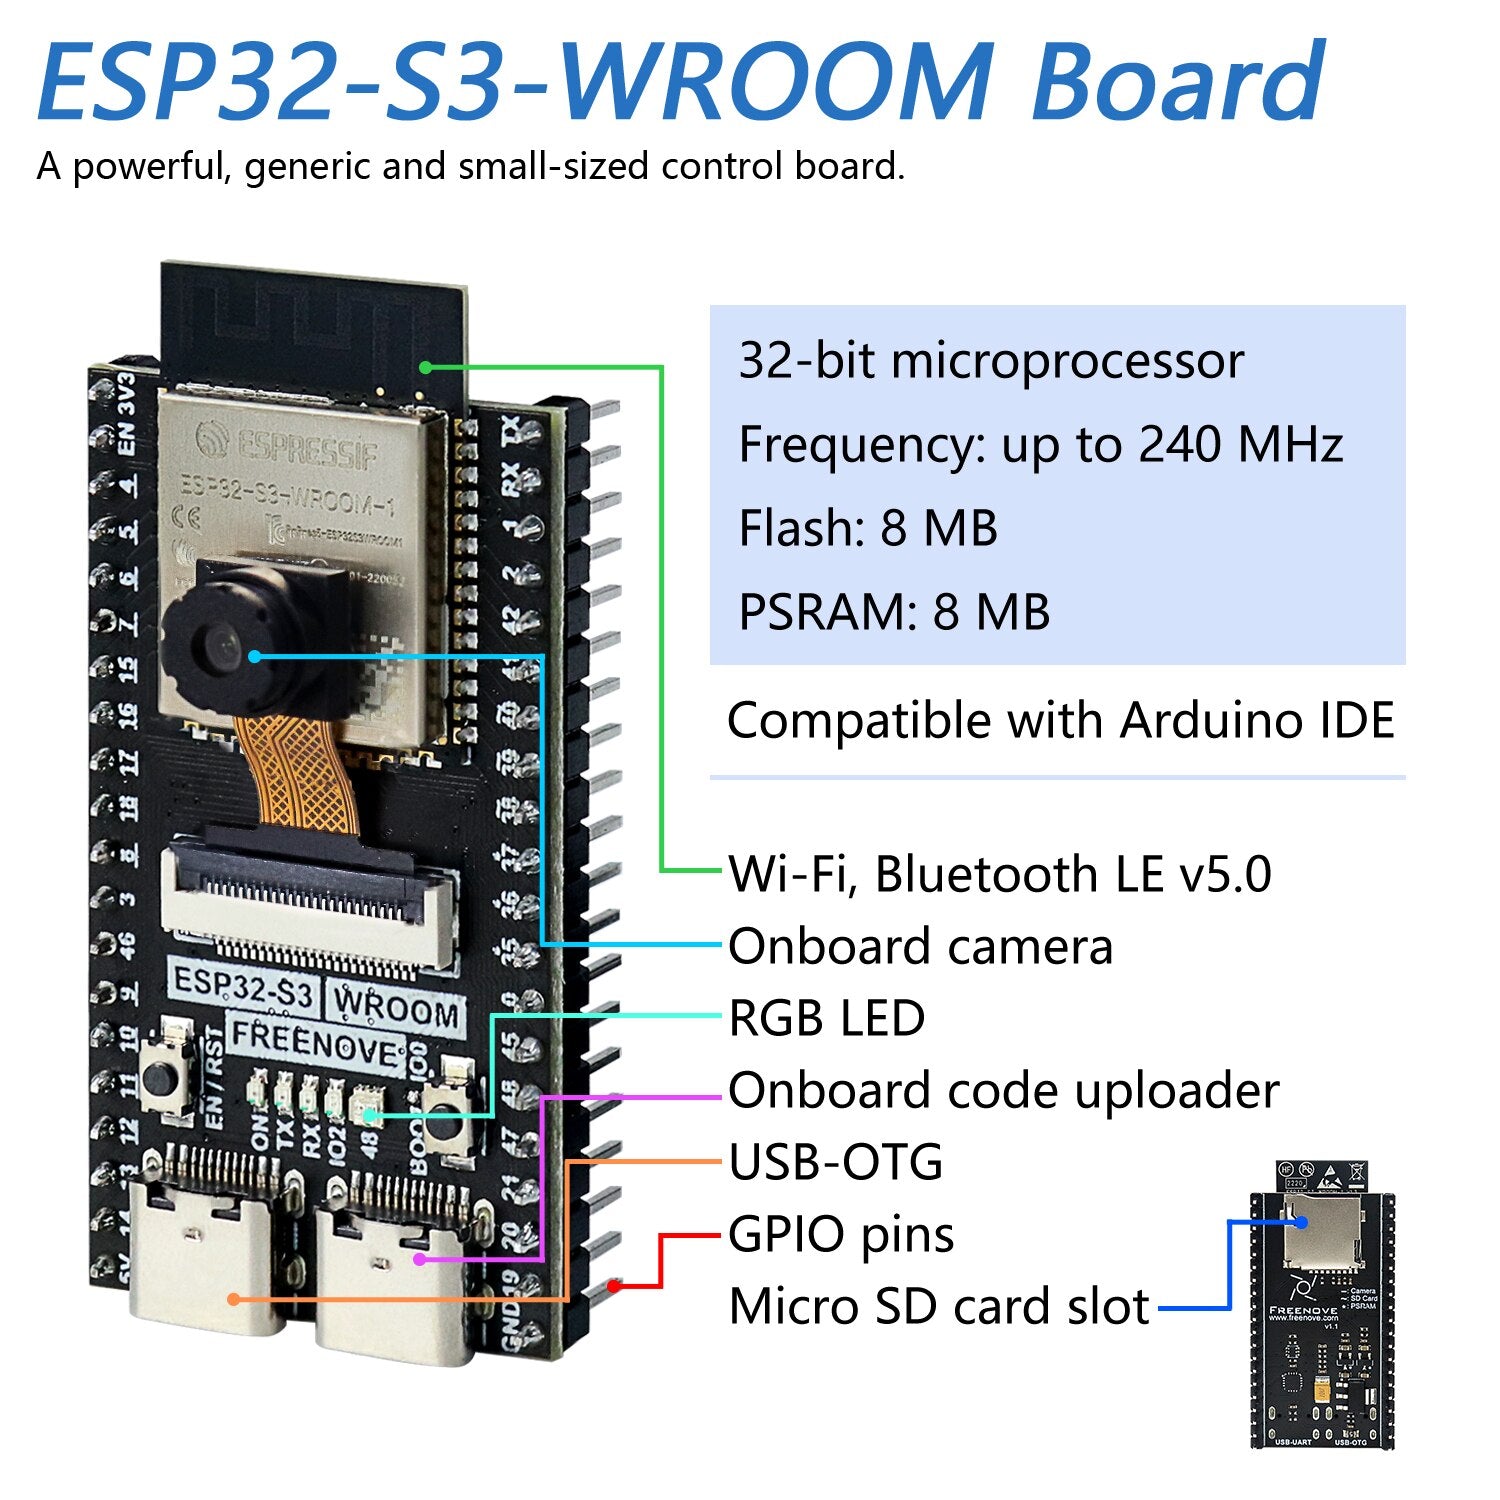 ESP32-S3-WROOM Board A powerful, generic and small-sized control